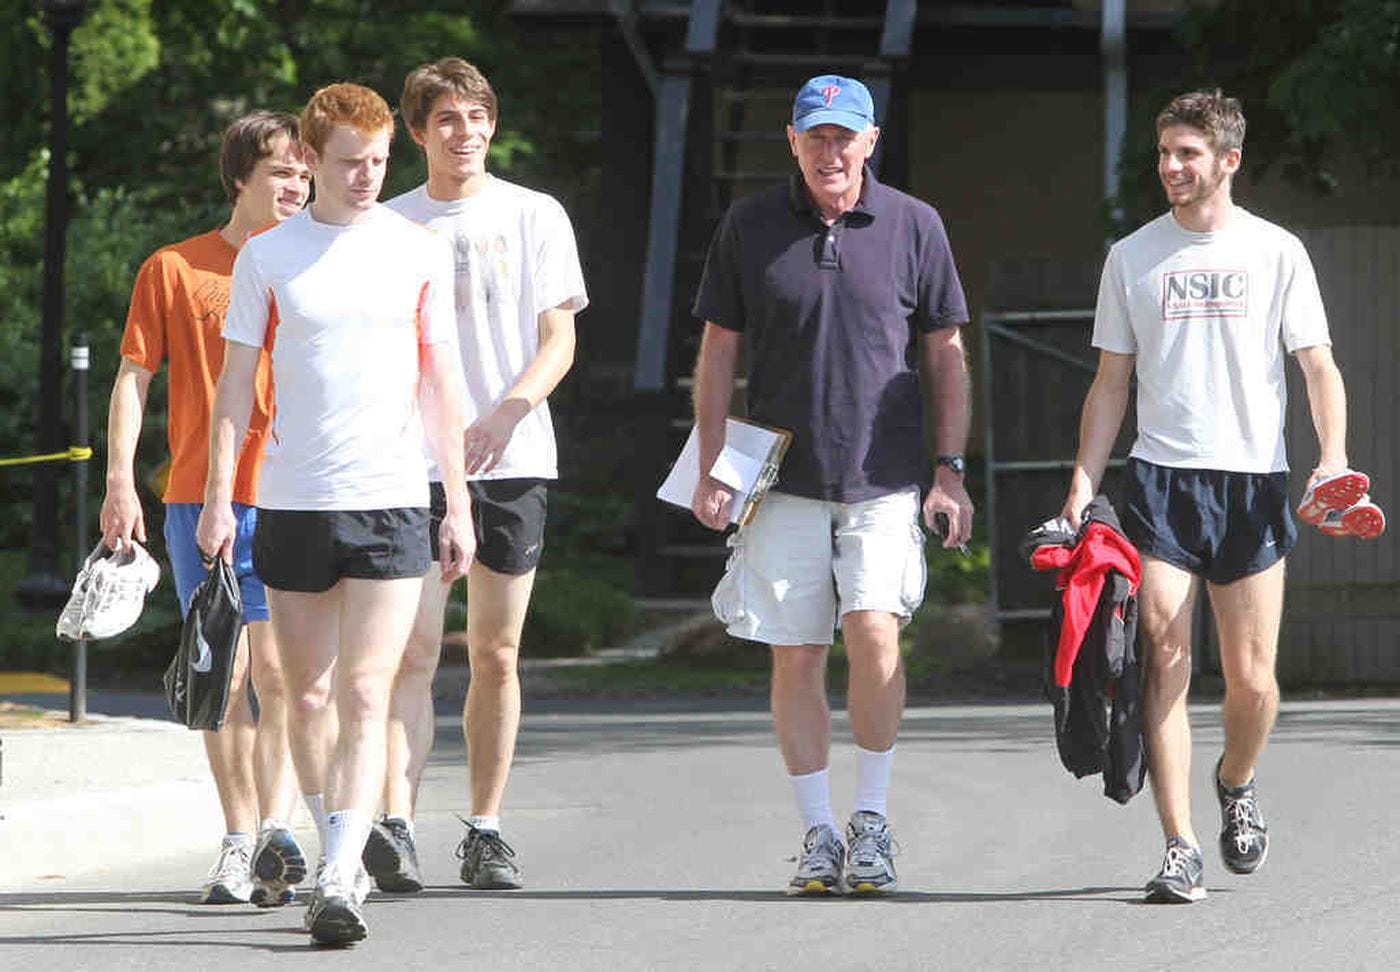 Tom Donnelly walks to practice with members of his team. "As a coach, you influence [athletes] by 1 percent, maybe," he said.